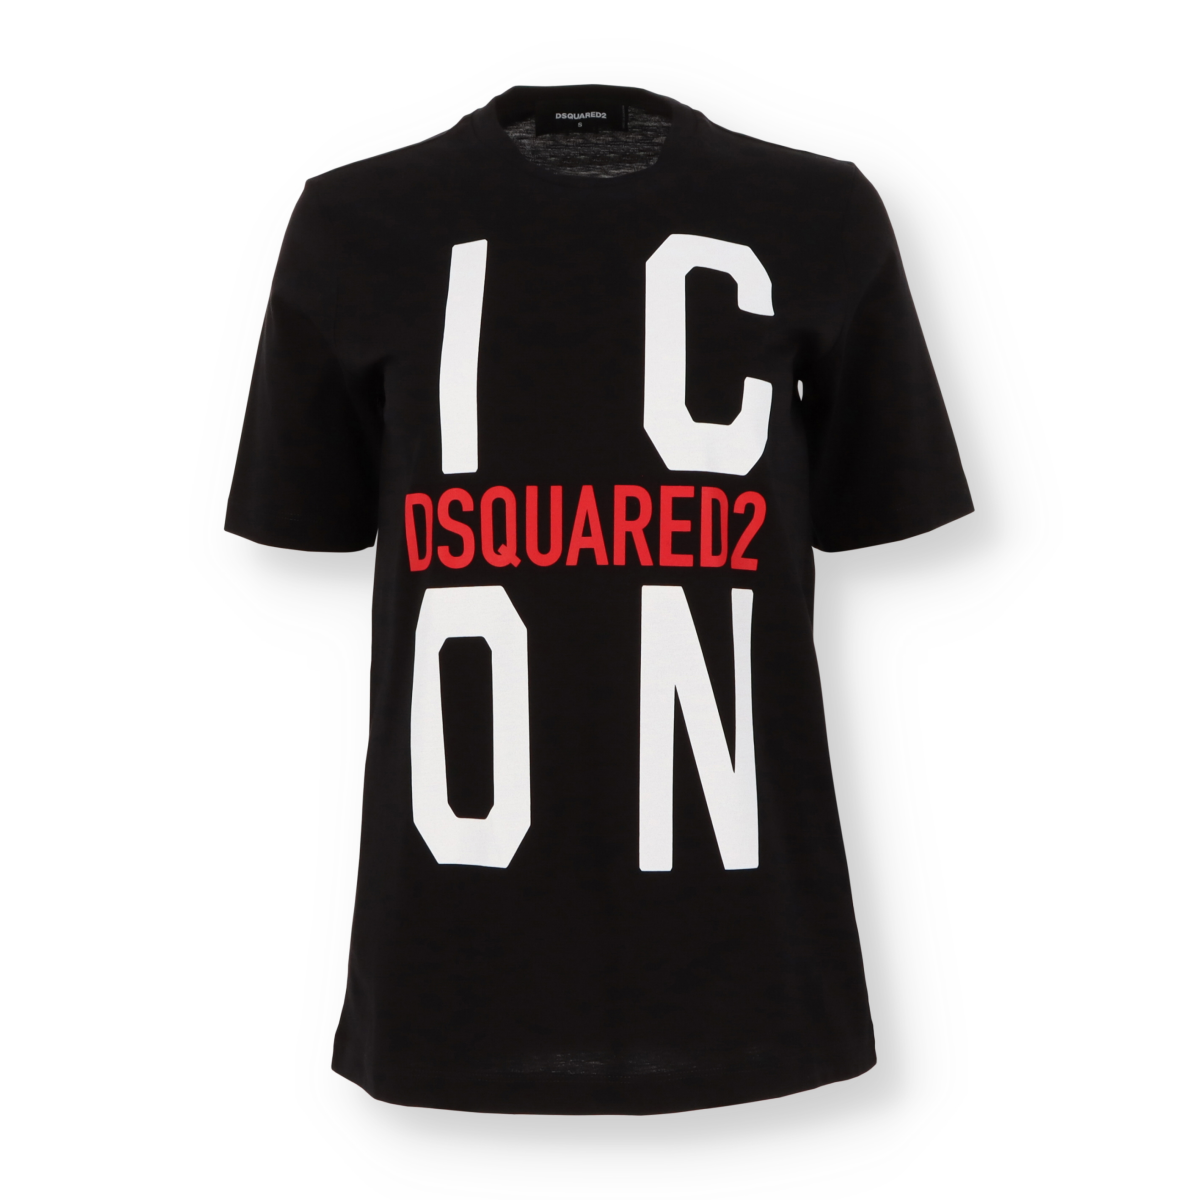 T-Shirt Dsquared2 Iconic - Outlet